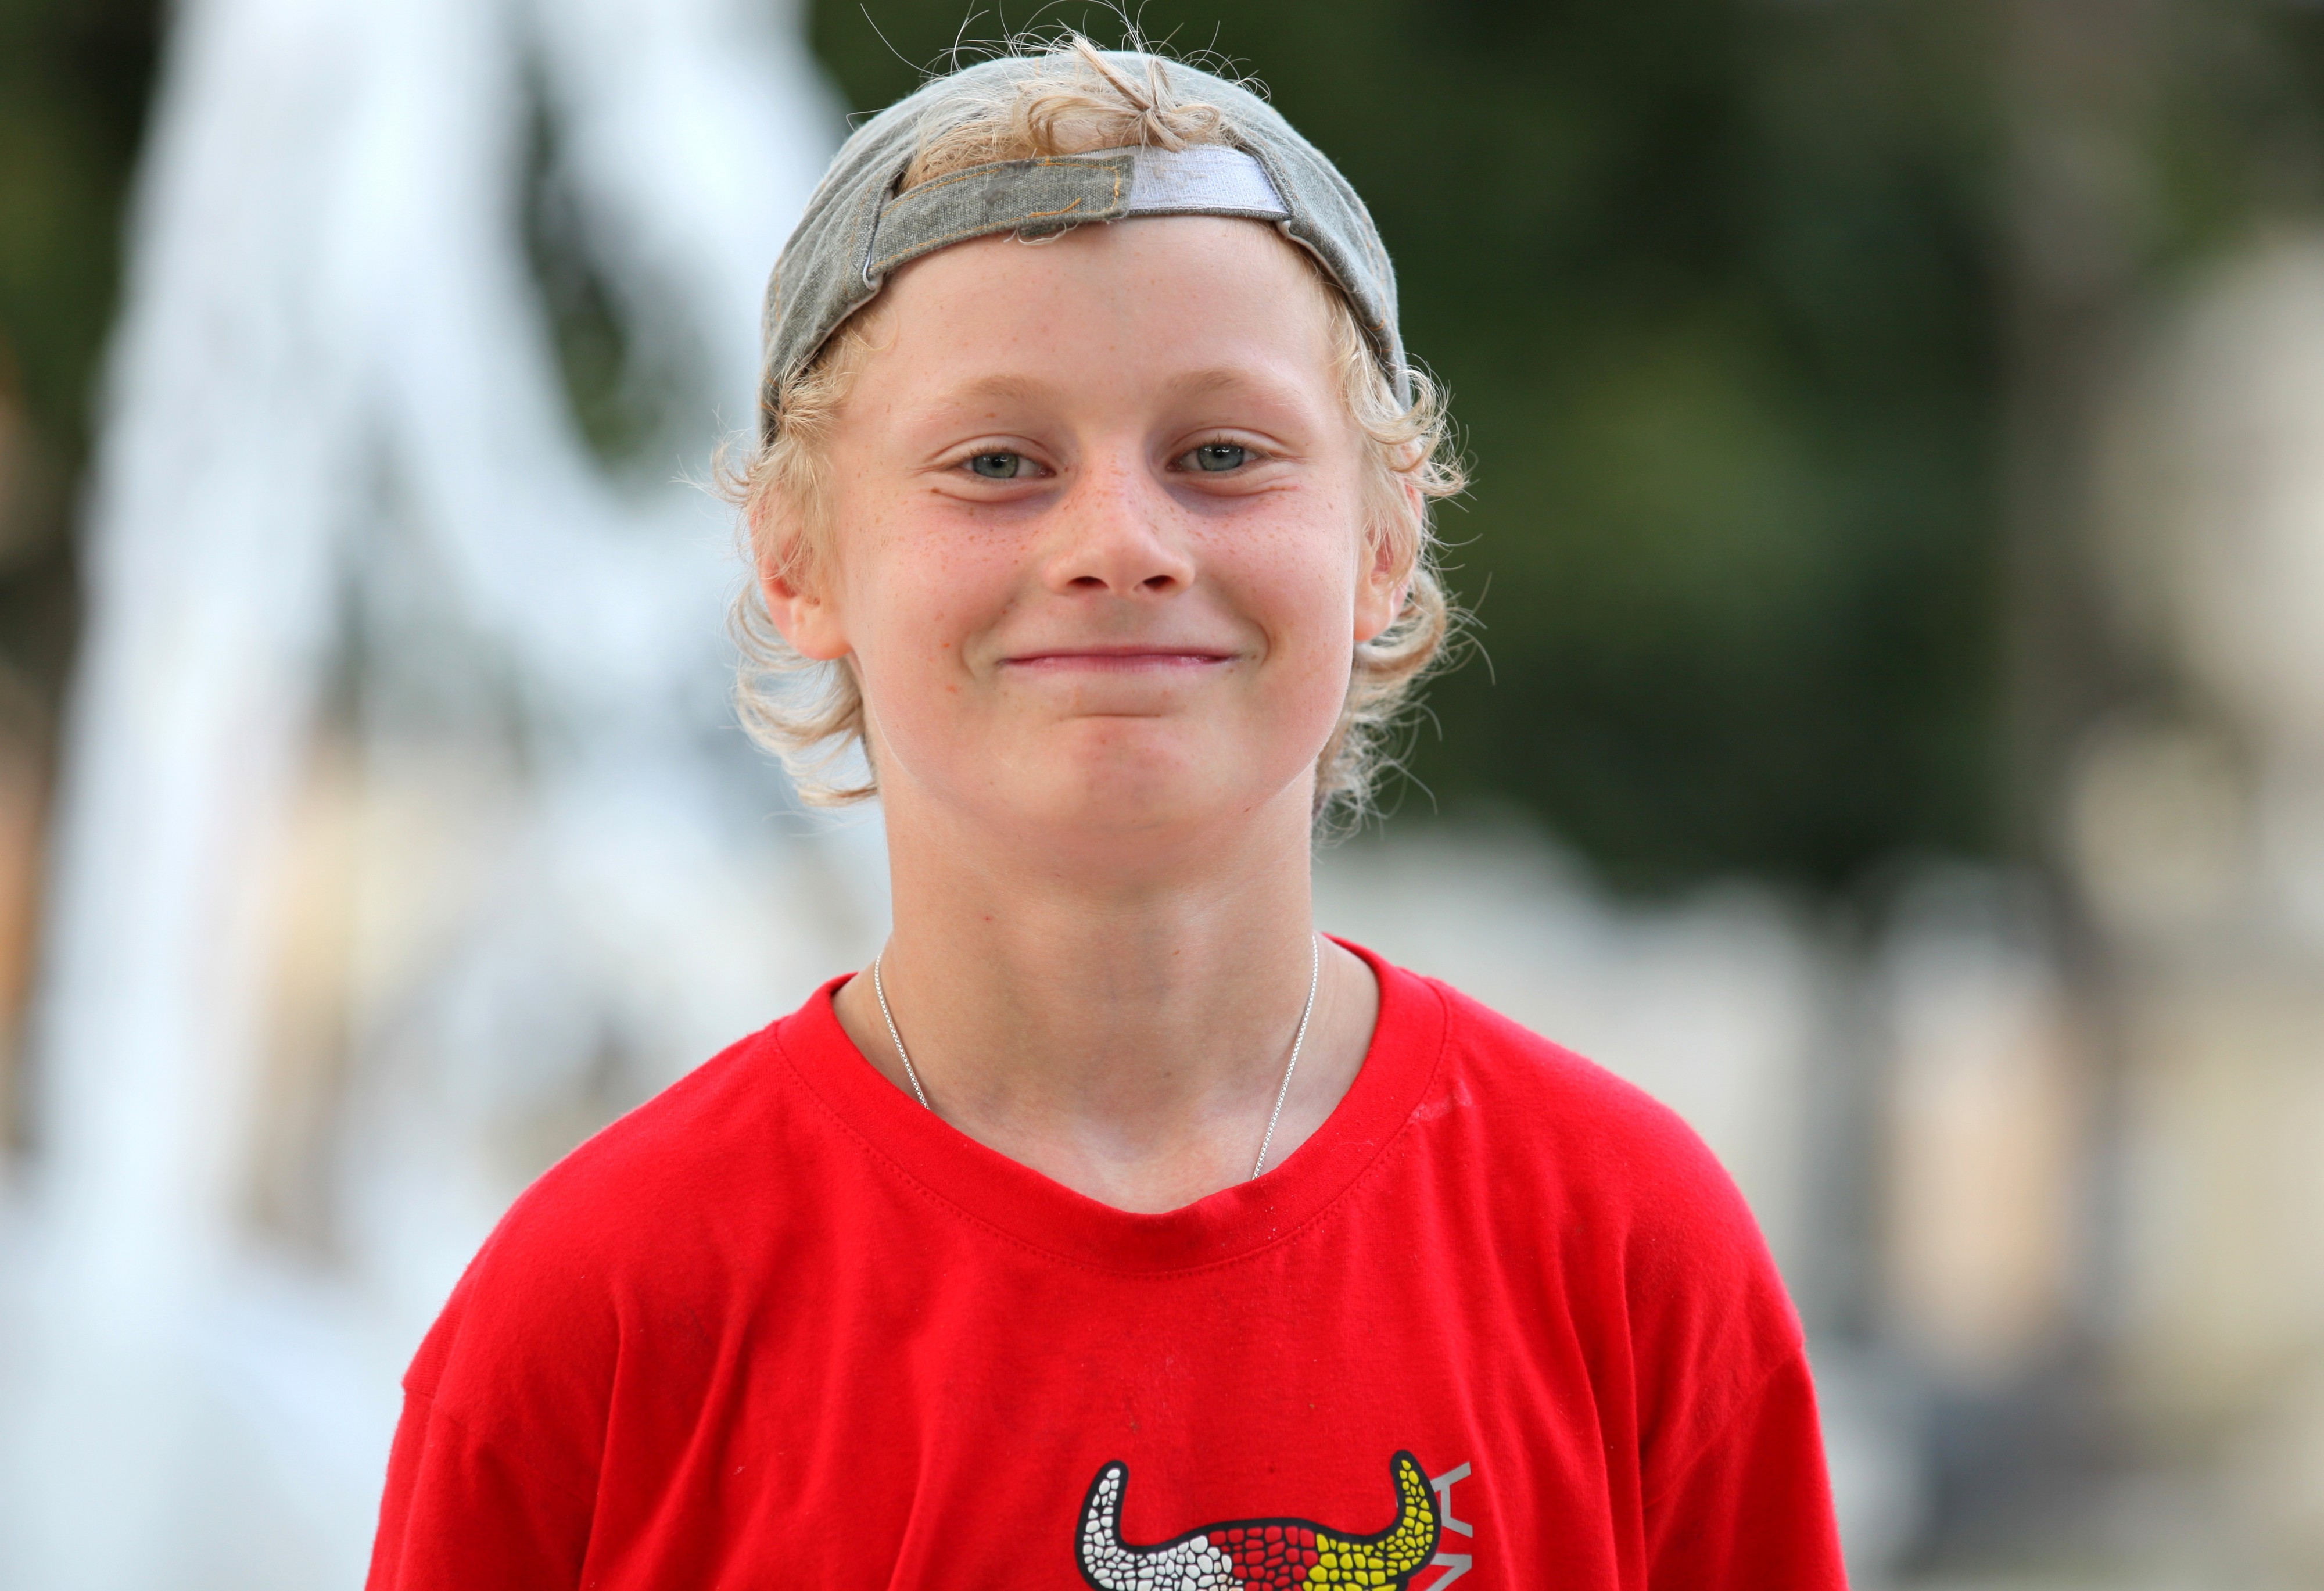 a young blond boy photographed in August 2013